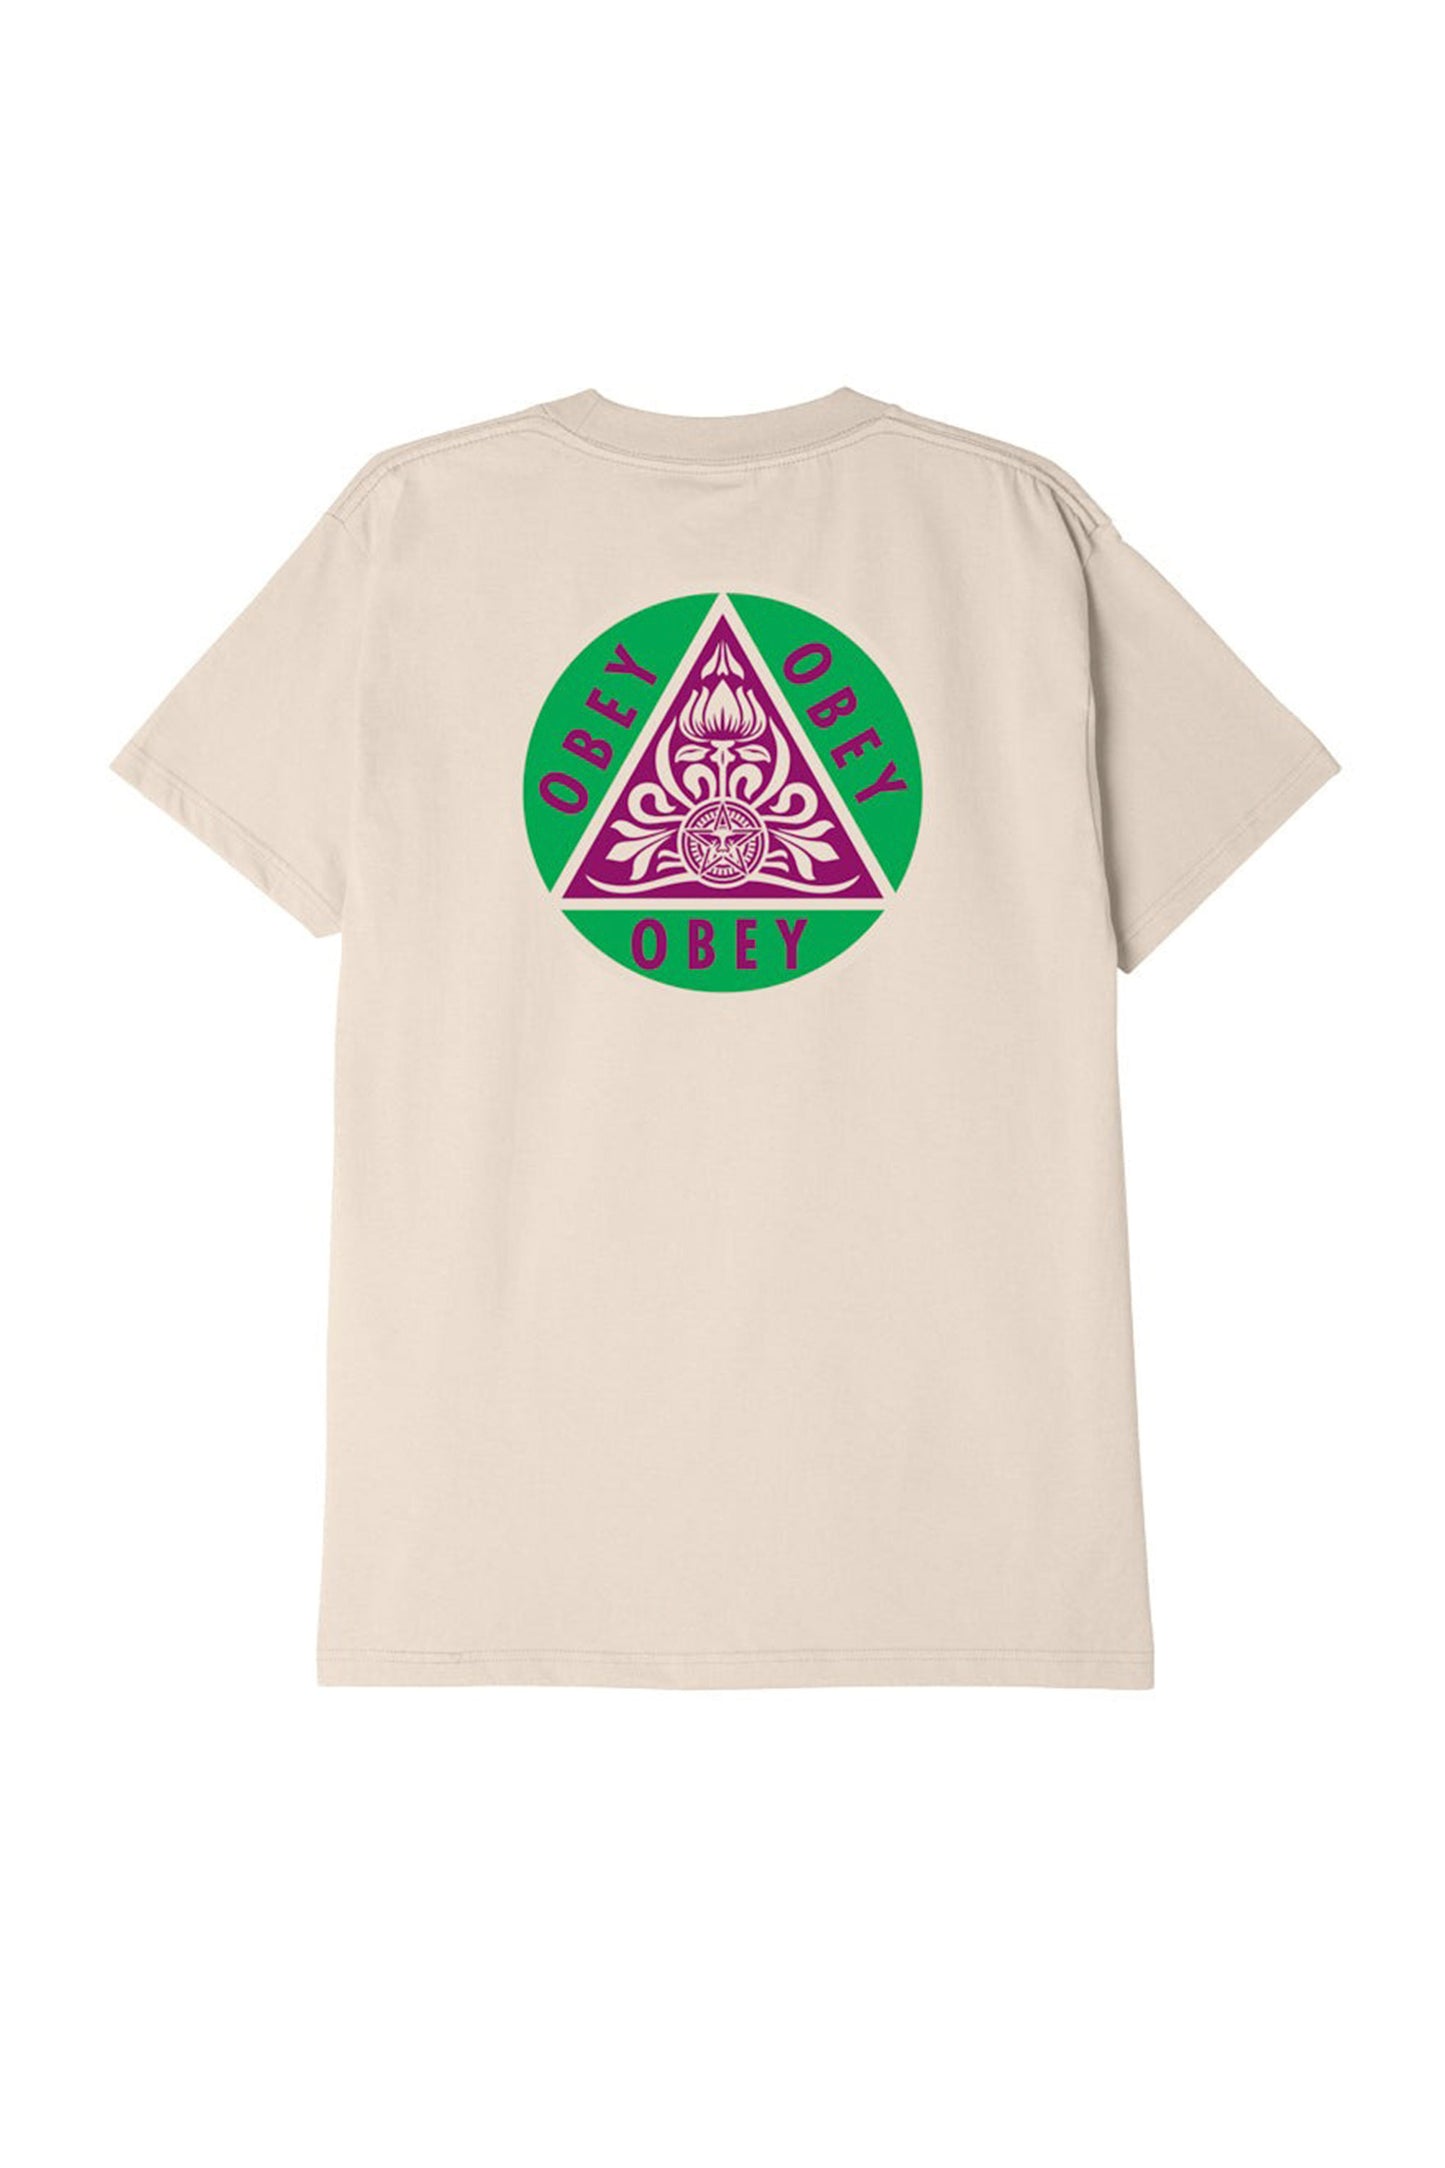 Pukas-Surf-Shop-Obey-Tee-Obey-Pyramid-cream